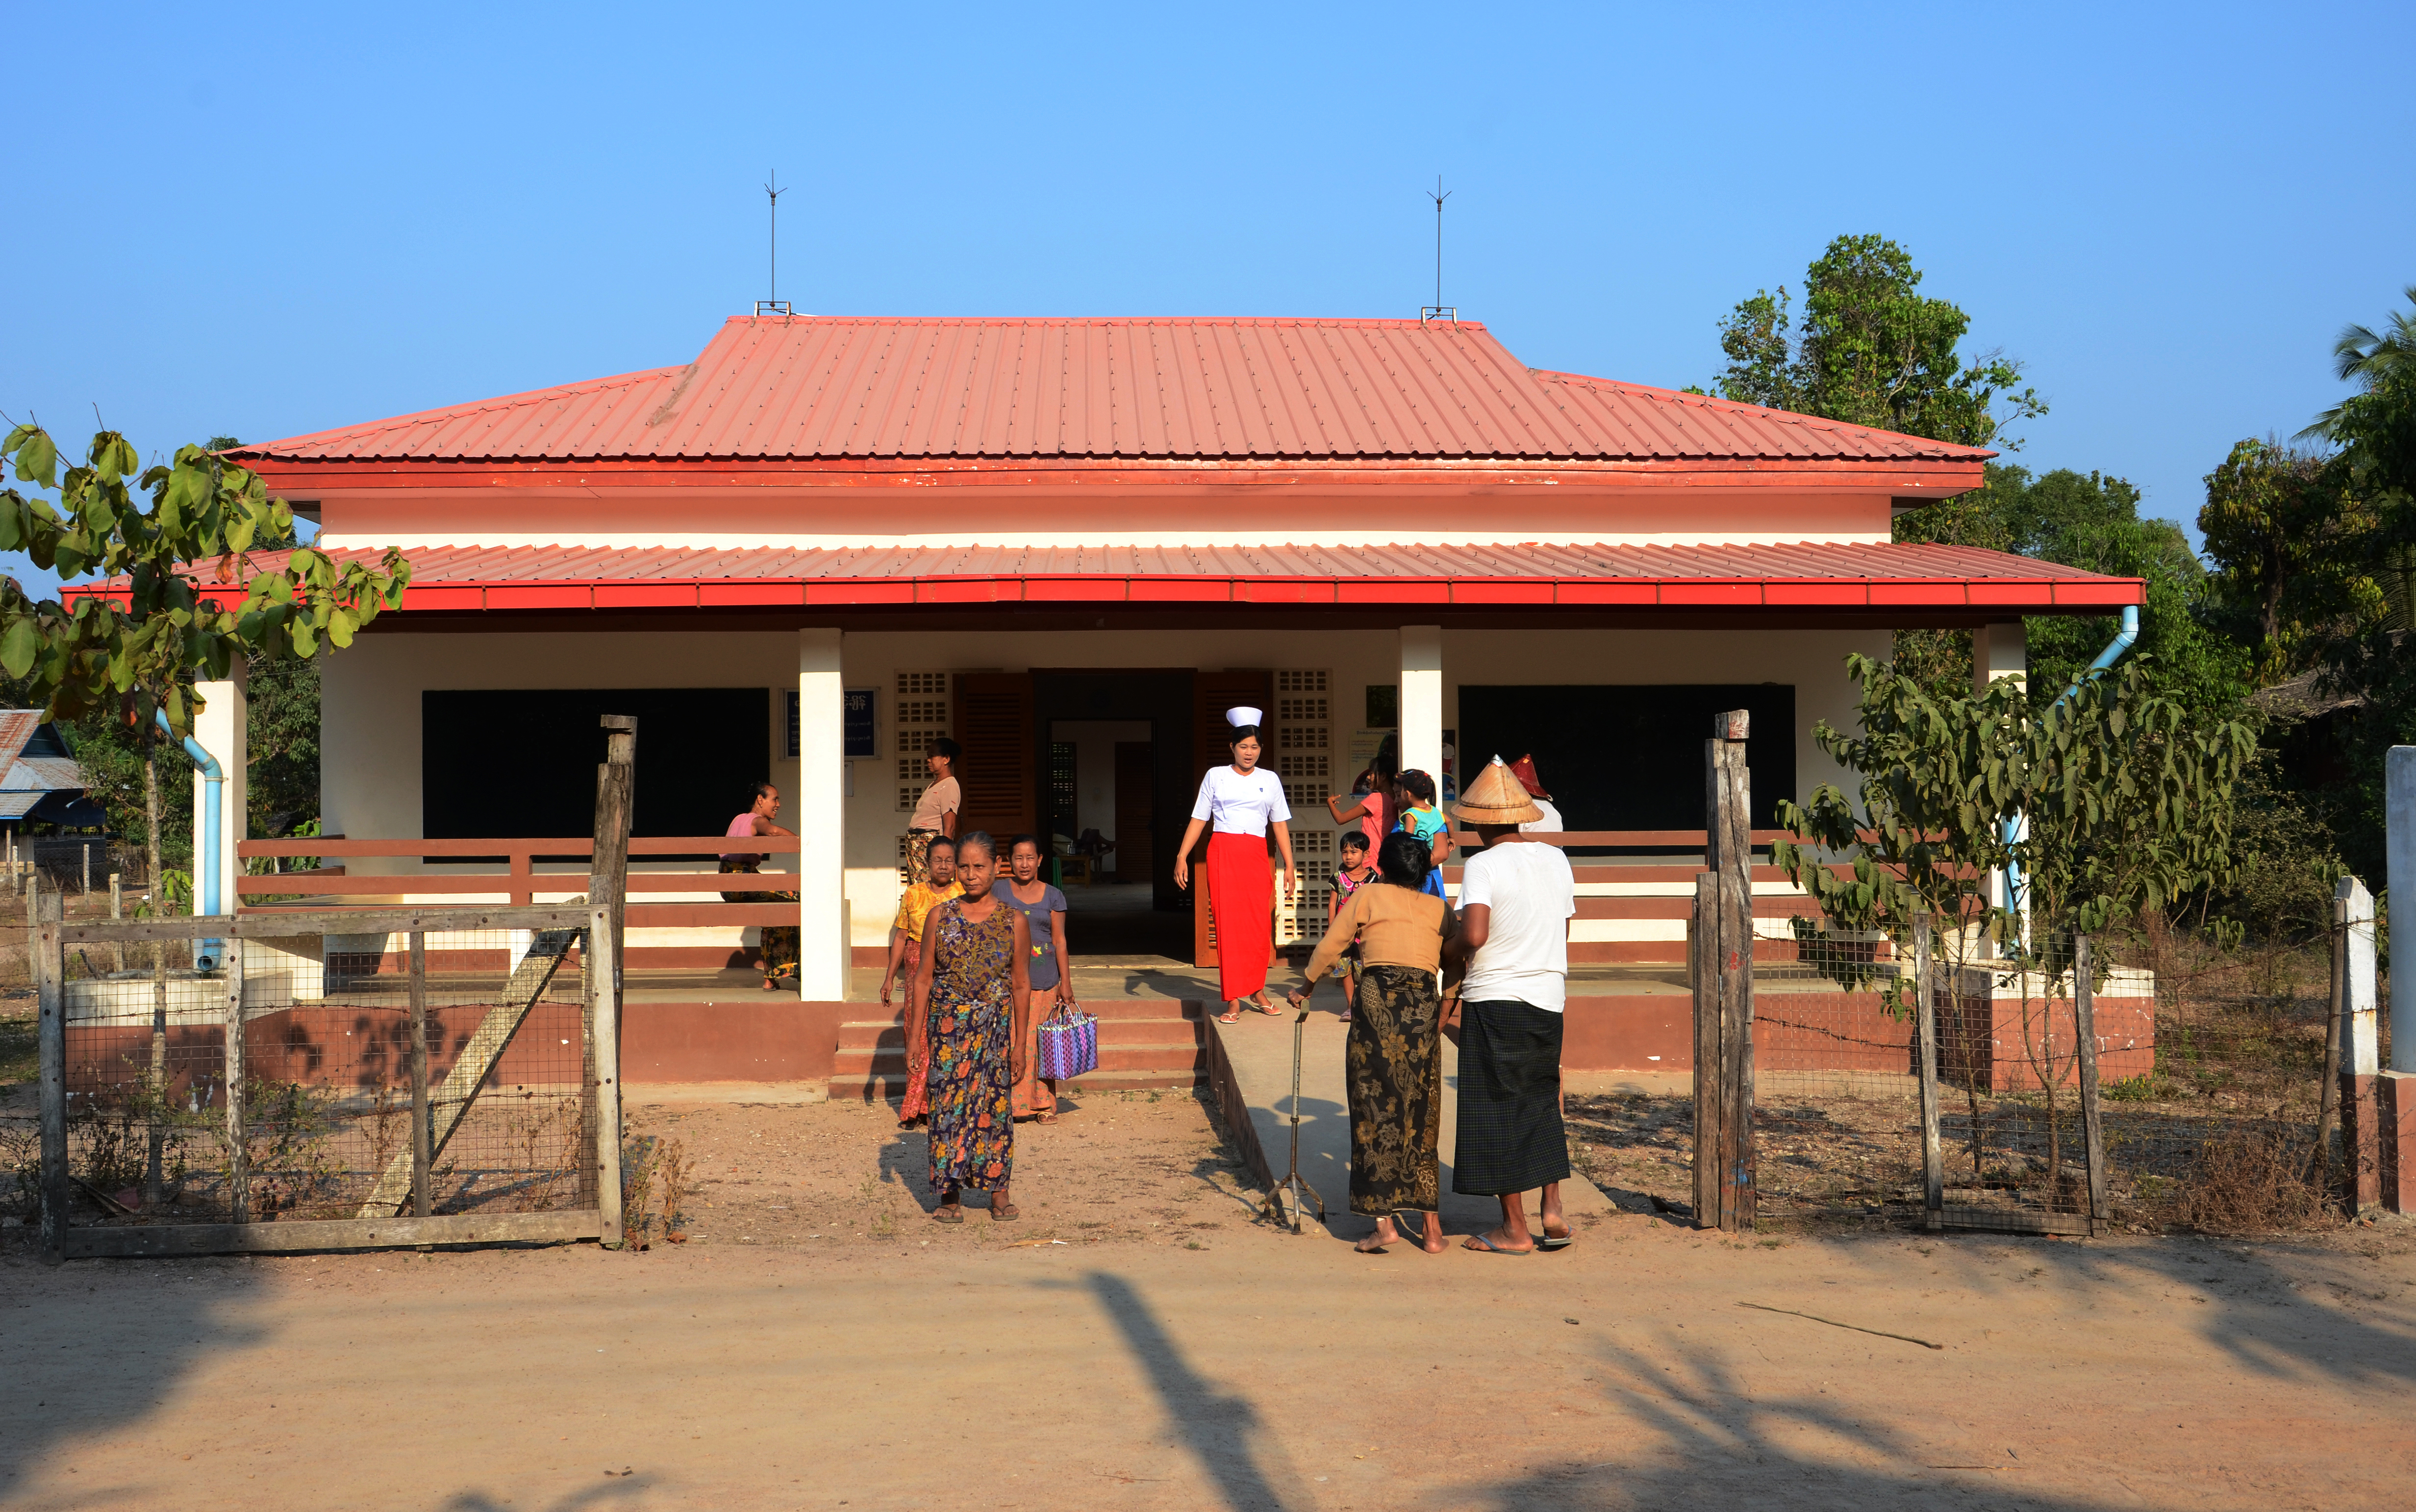 A nurse receives patients at the entrance to a health centre.